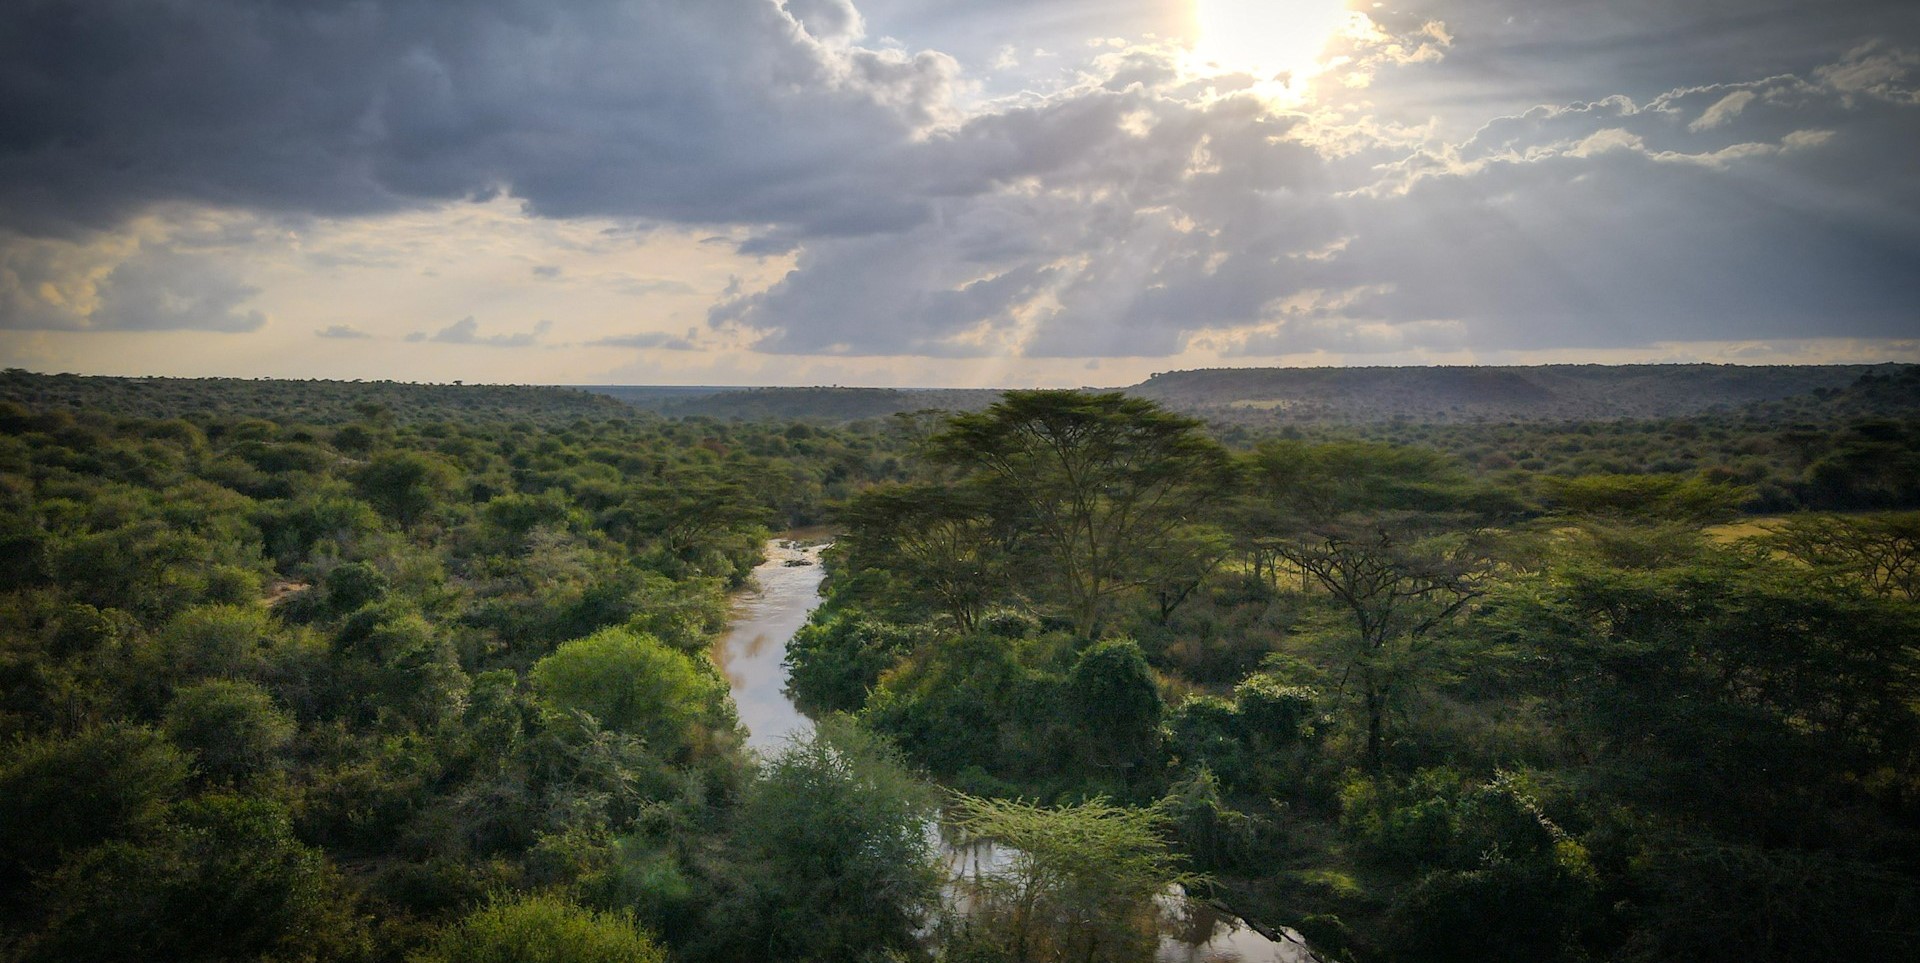 Exclusive concession for Kenya s Suyian Conservancy